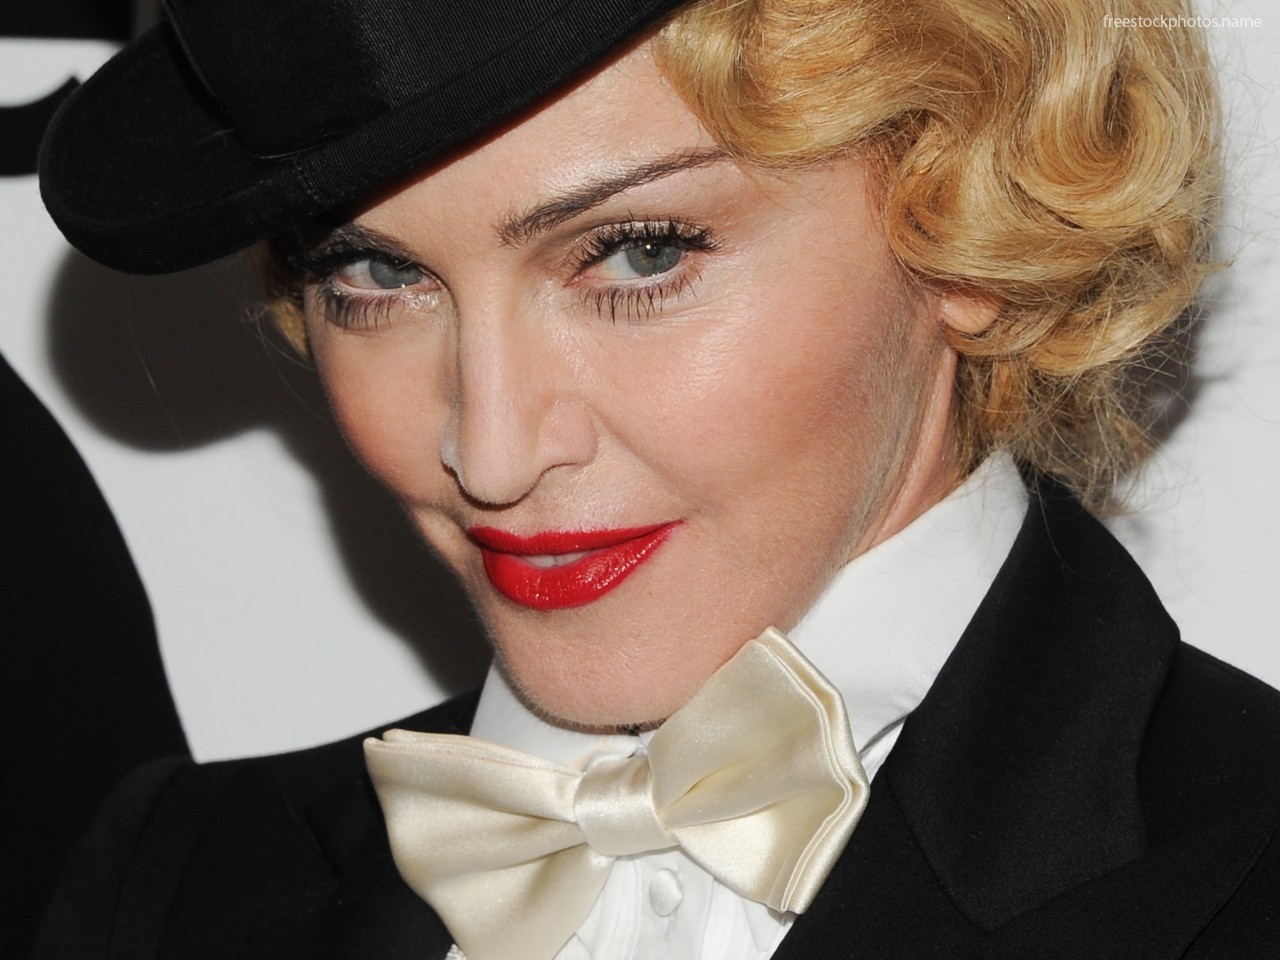 Stock Photos Of Madonna With Hat Image Photography